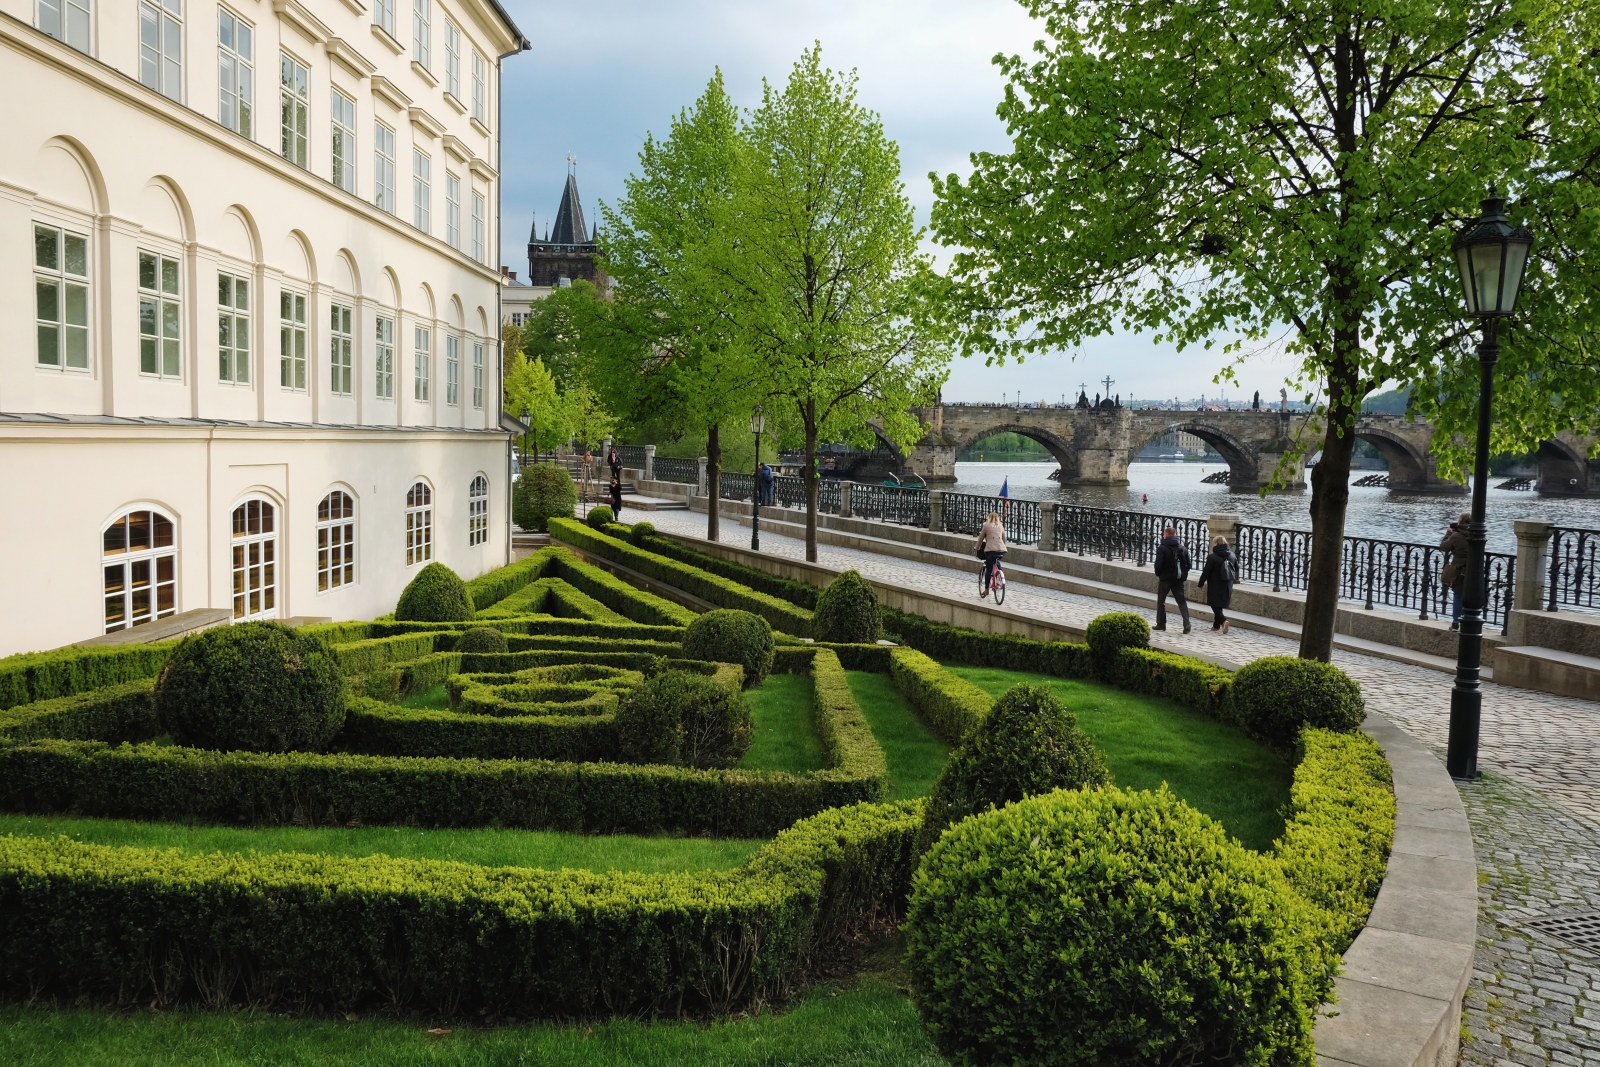 A small park with a low hedge topiary maze with the Charles bridge in the background. Travel photography by Kent Johnson.